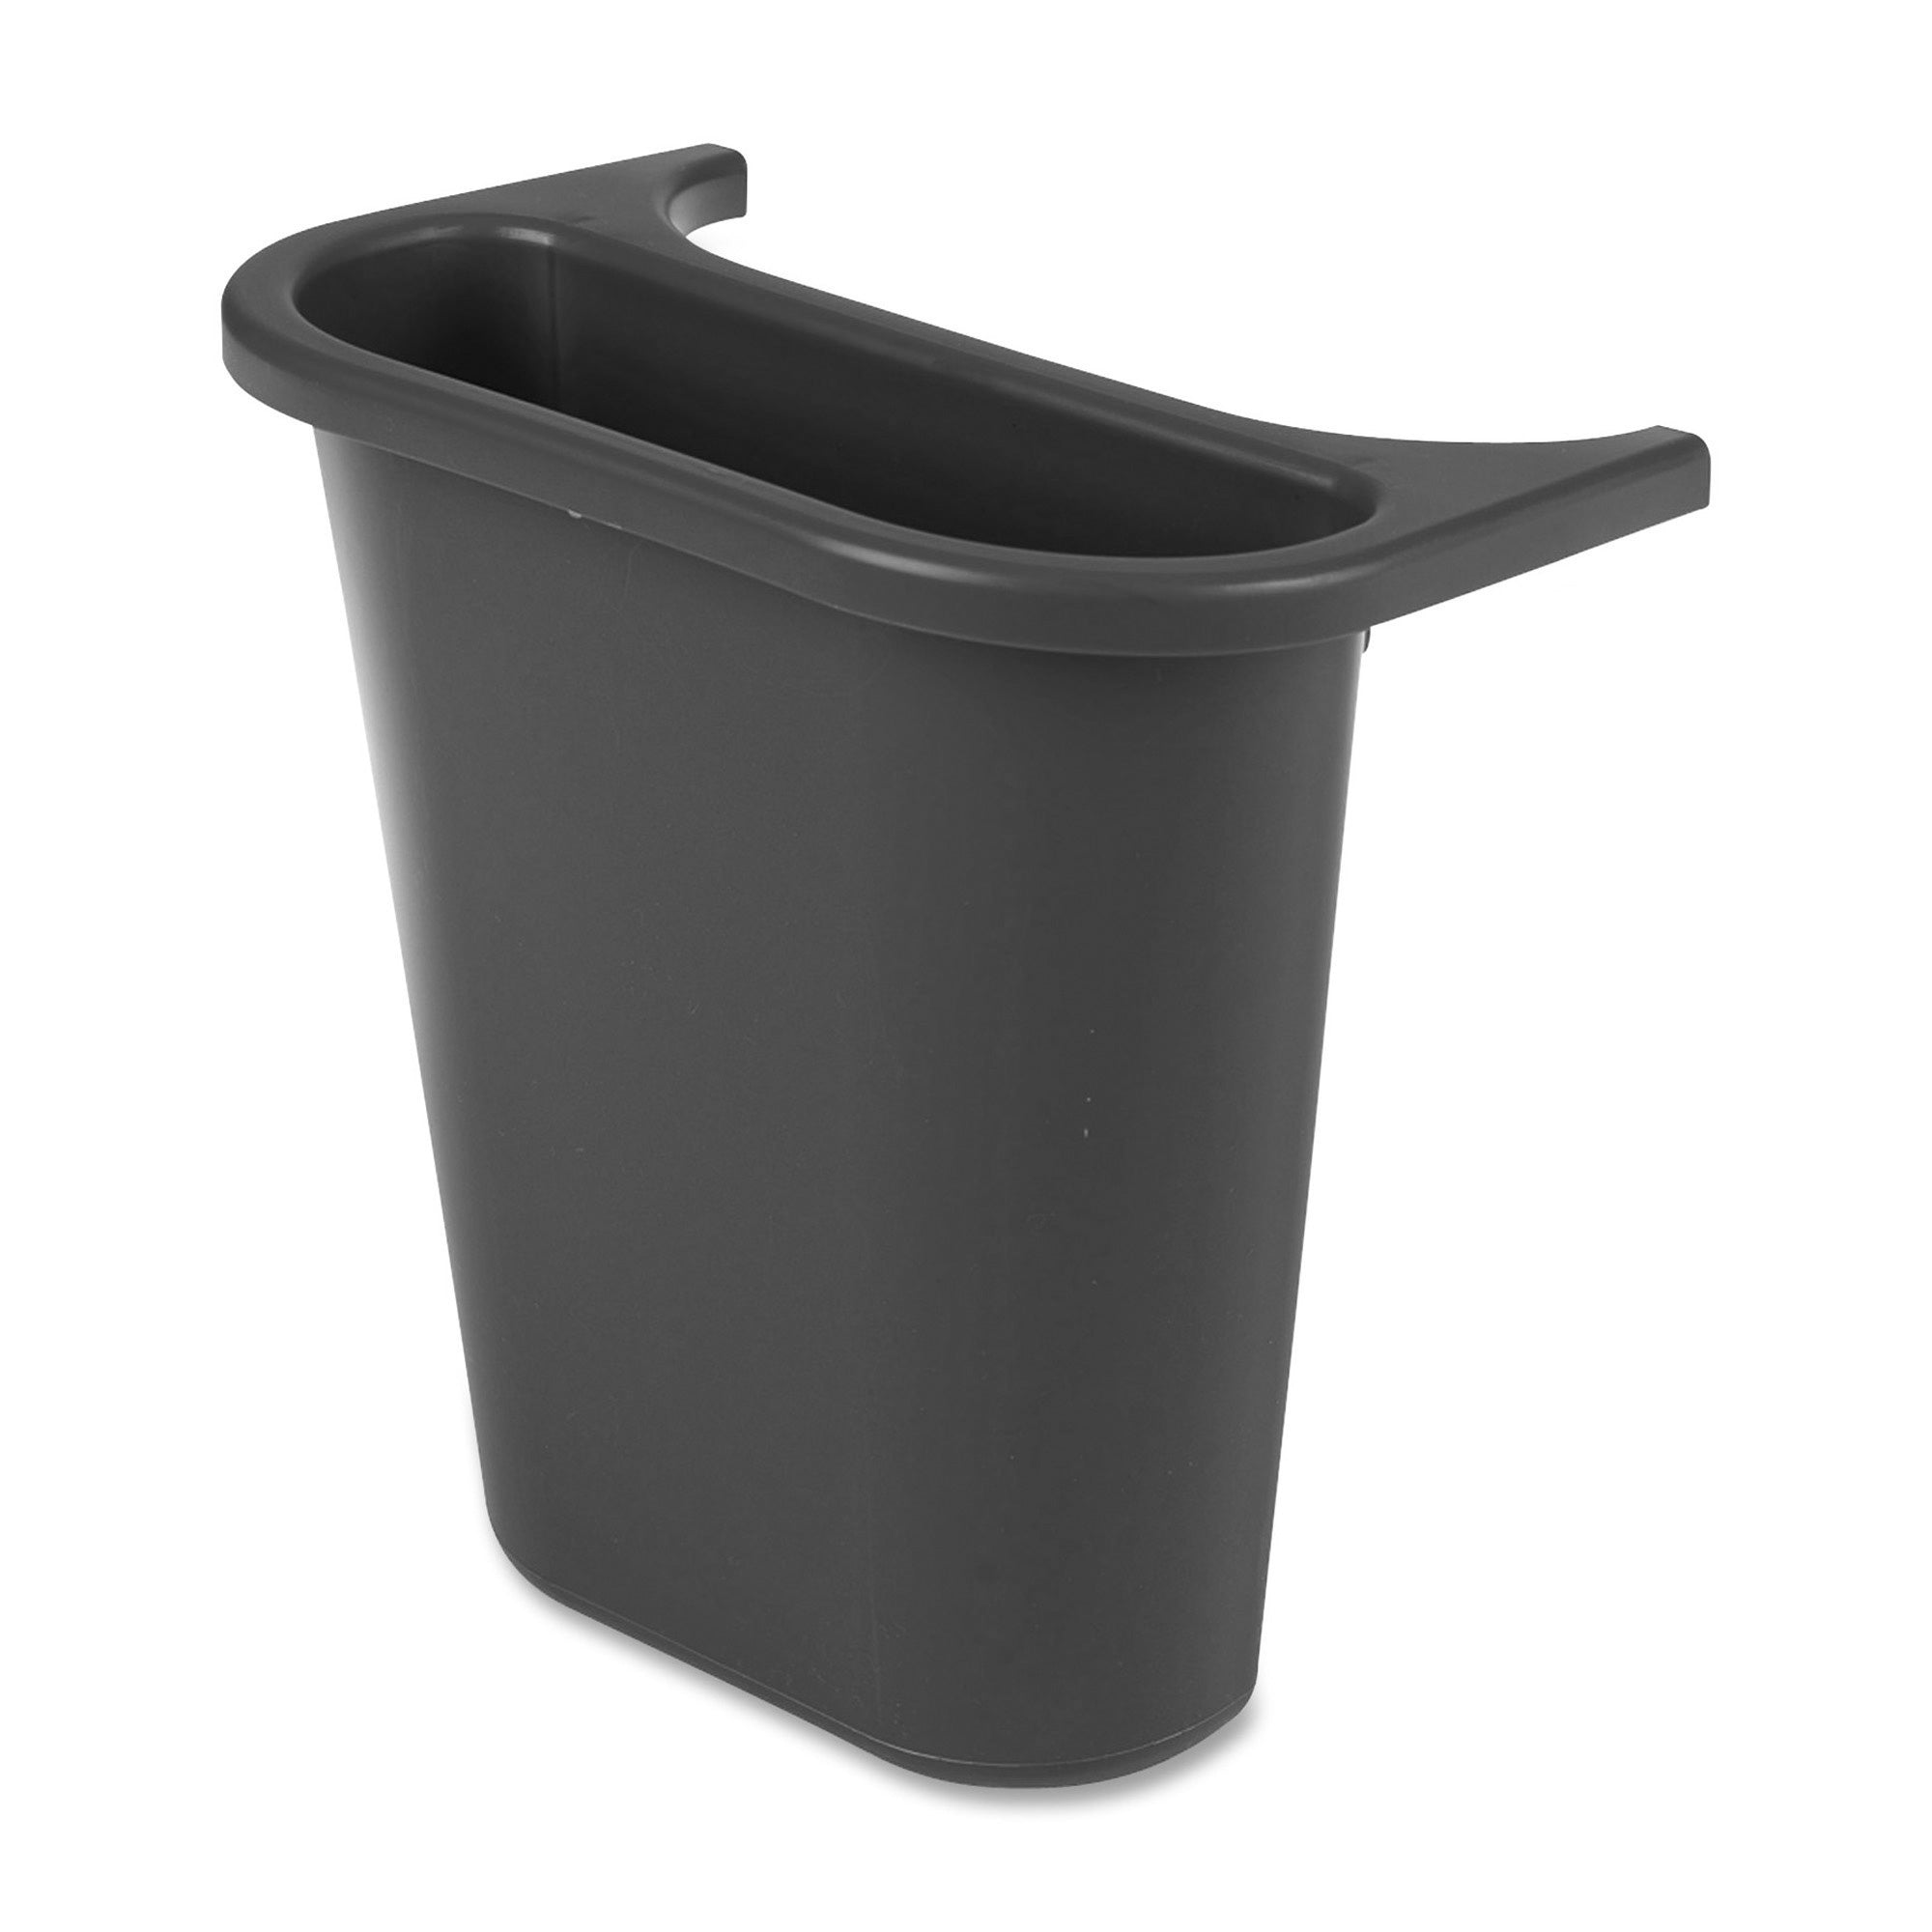 rubbermaid-commercial-saddlebasket-recycling-side-bin-119-gal-capacity-rectangular-chip-resistant-rust-resistant-dent-resistant-easy-to-clean-115-height-x-73-width-x-106-depth-plastic-black-12-carton_rcp295073ct - 1